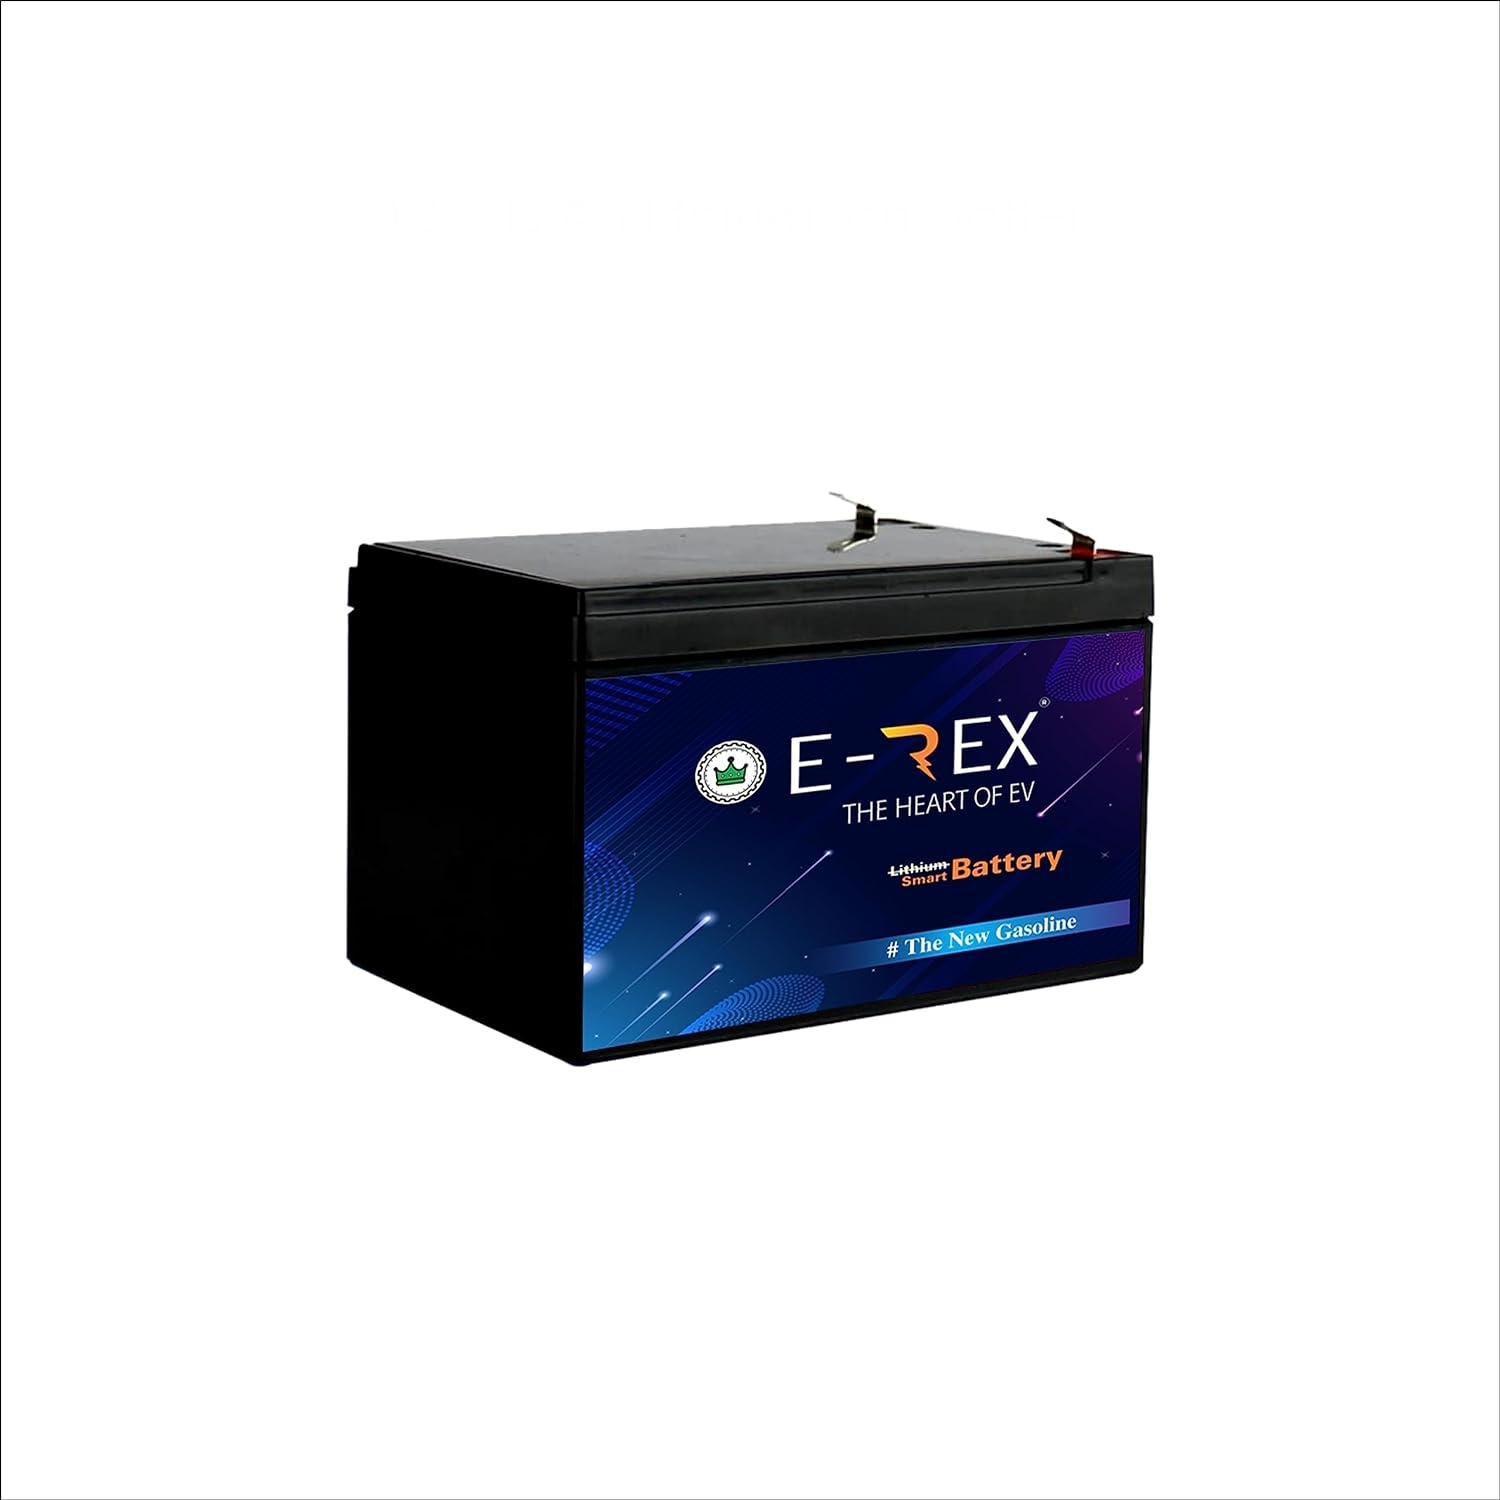 E-Rex 12V 12Ah Rechargeable Lithium Battery | LiFePo4 Cells with BMS for Inverter, Camera, Agriculture & Industrial uses